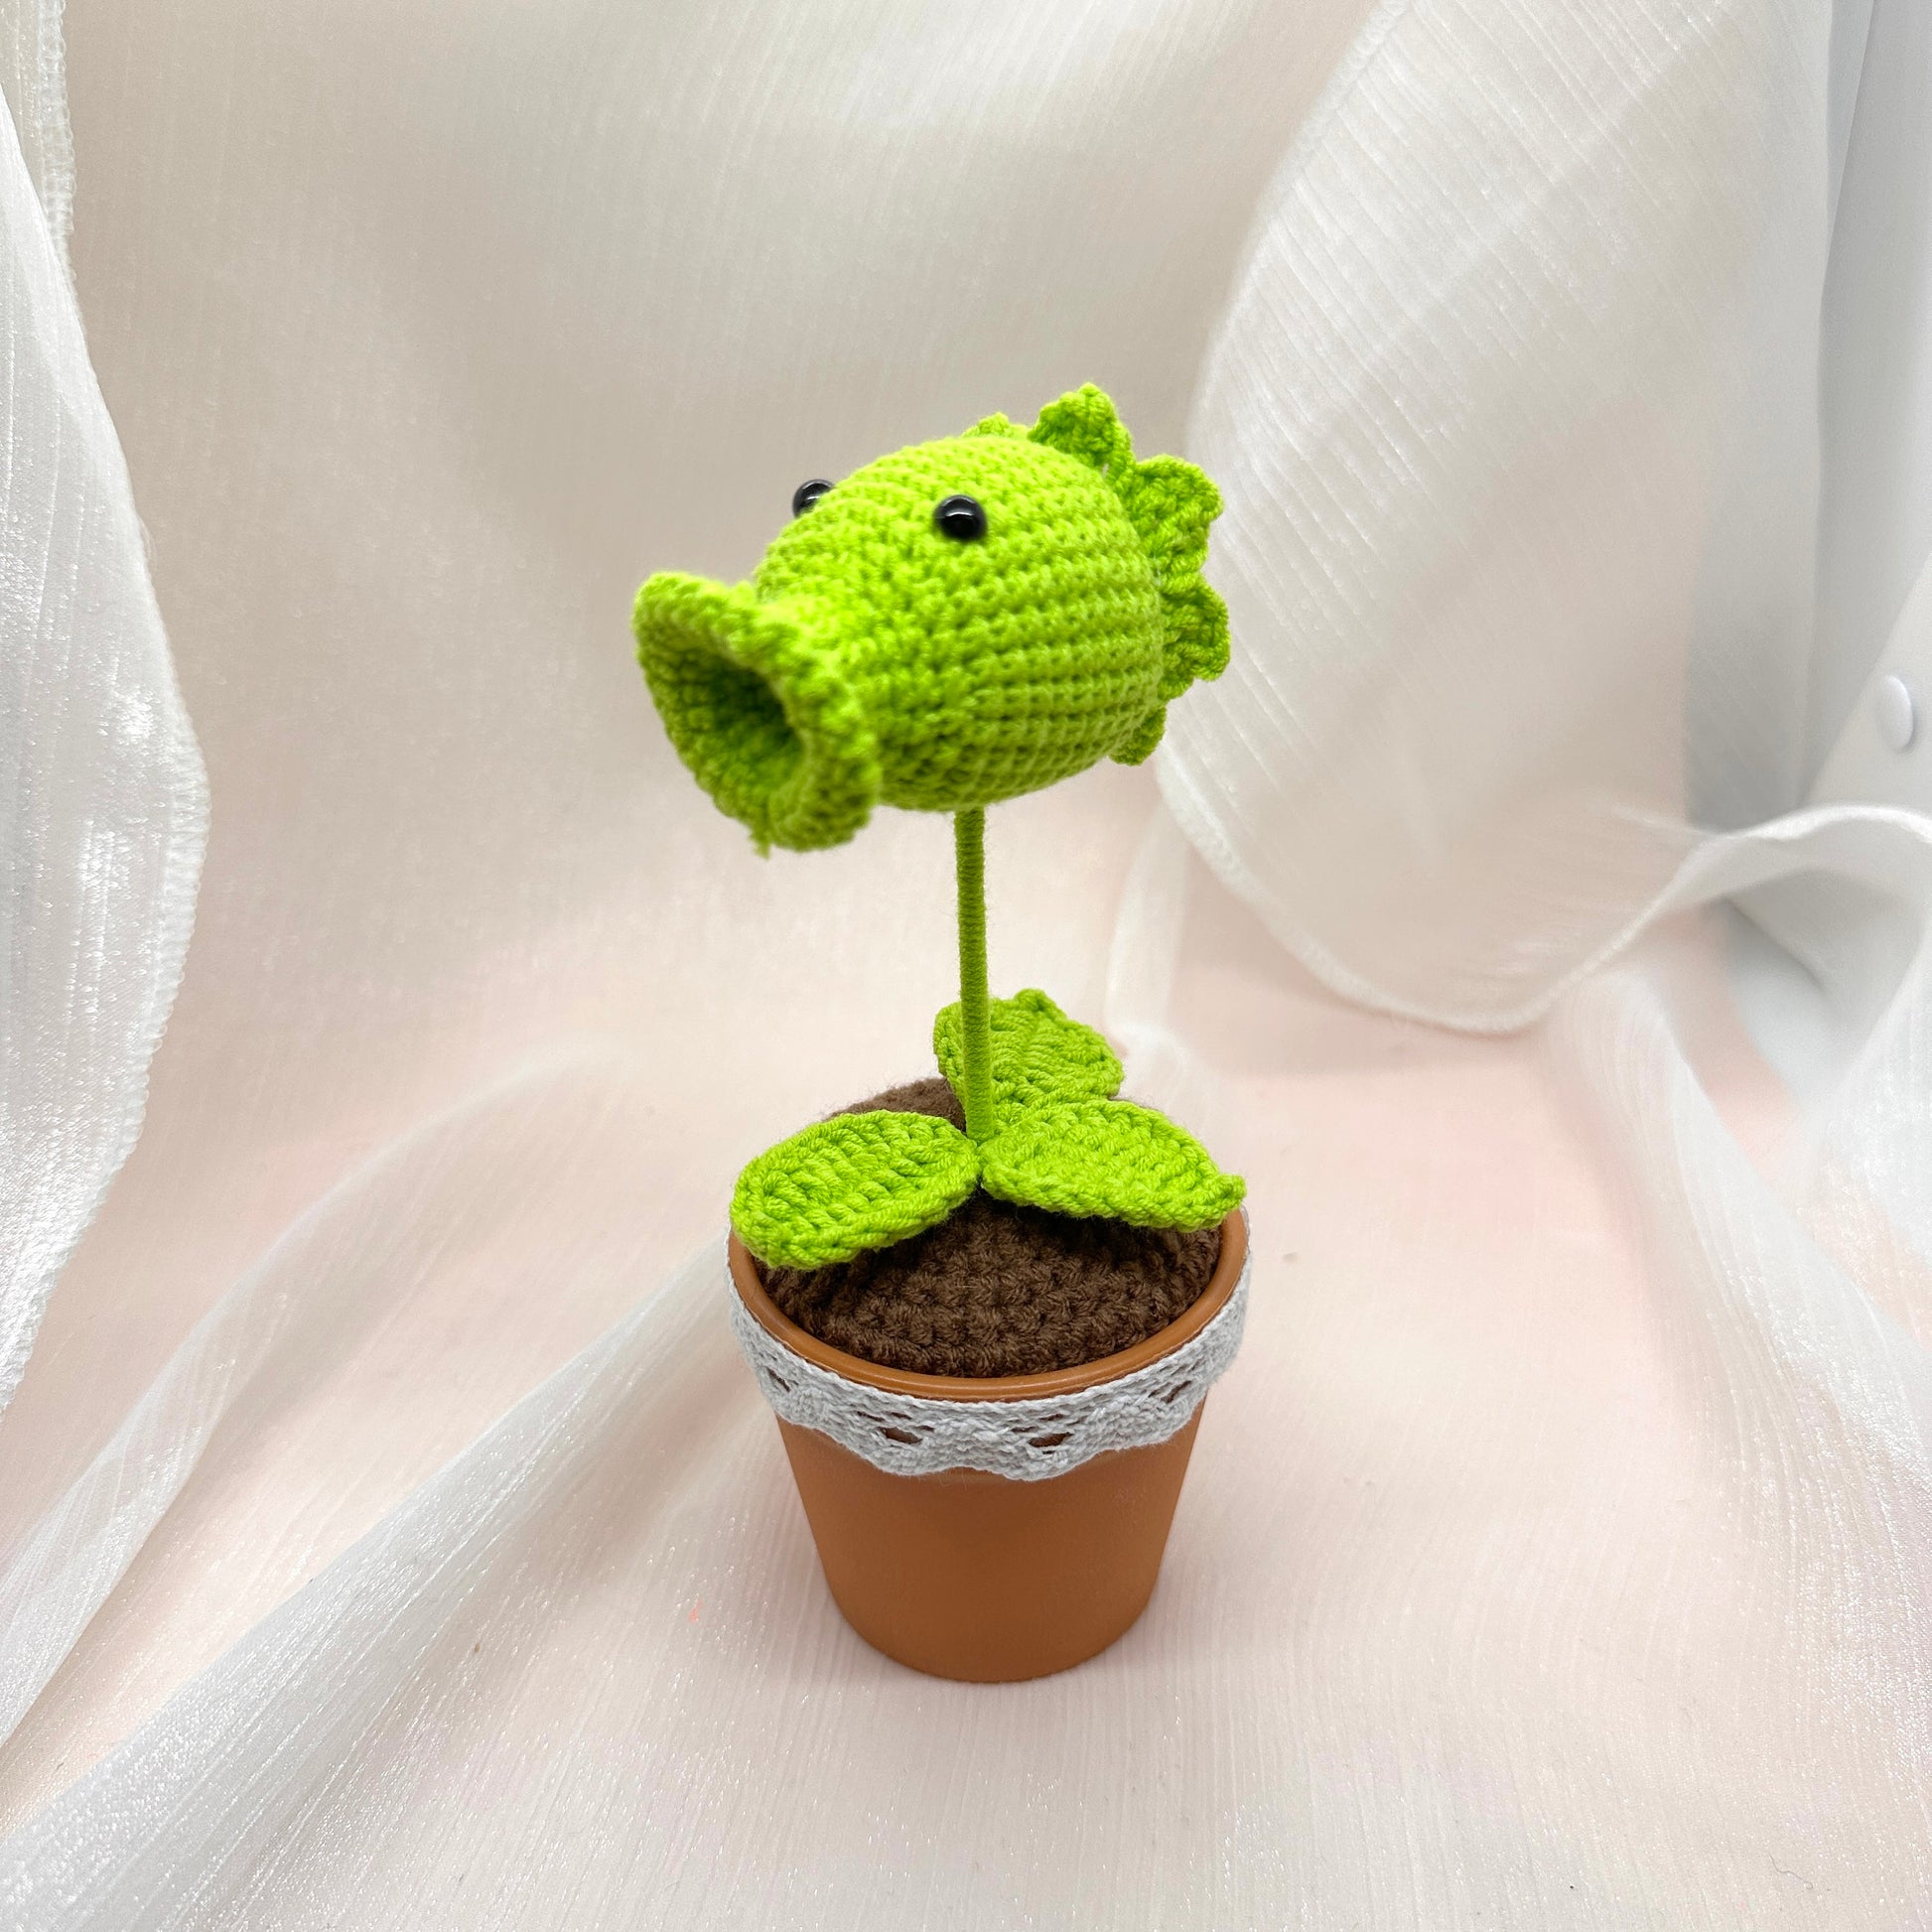 Crochet Plants vs. Zombies Pea Shooter Potted Plant, Handmade Knitted Plants, Gift Ideas, Decorative Flower, Car Decoration